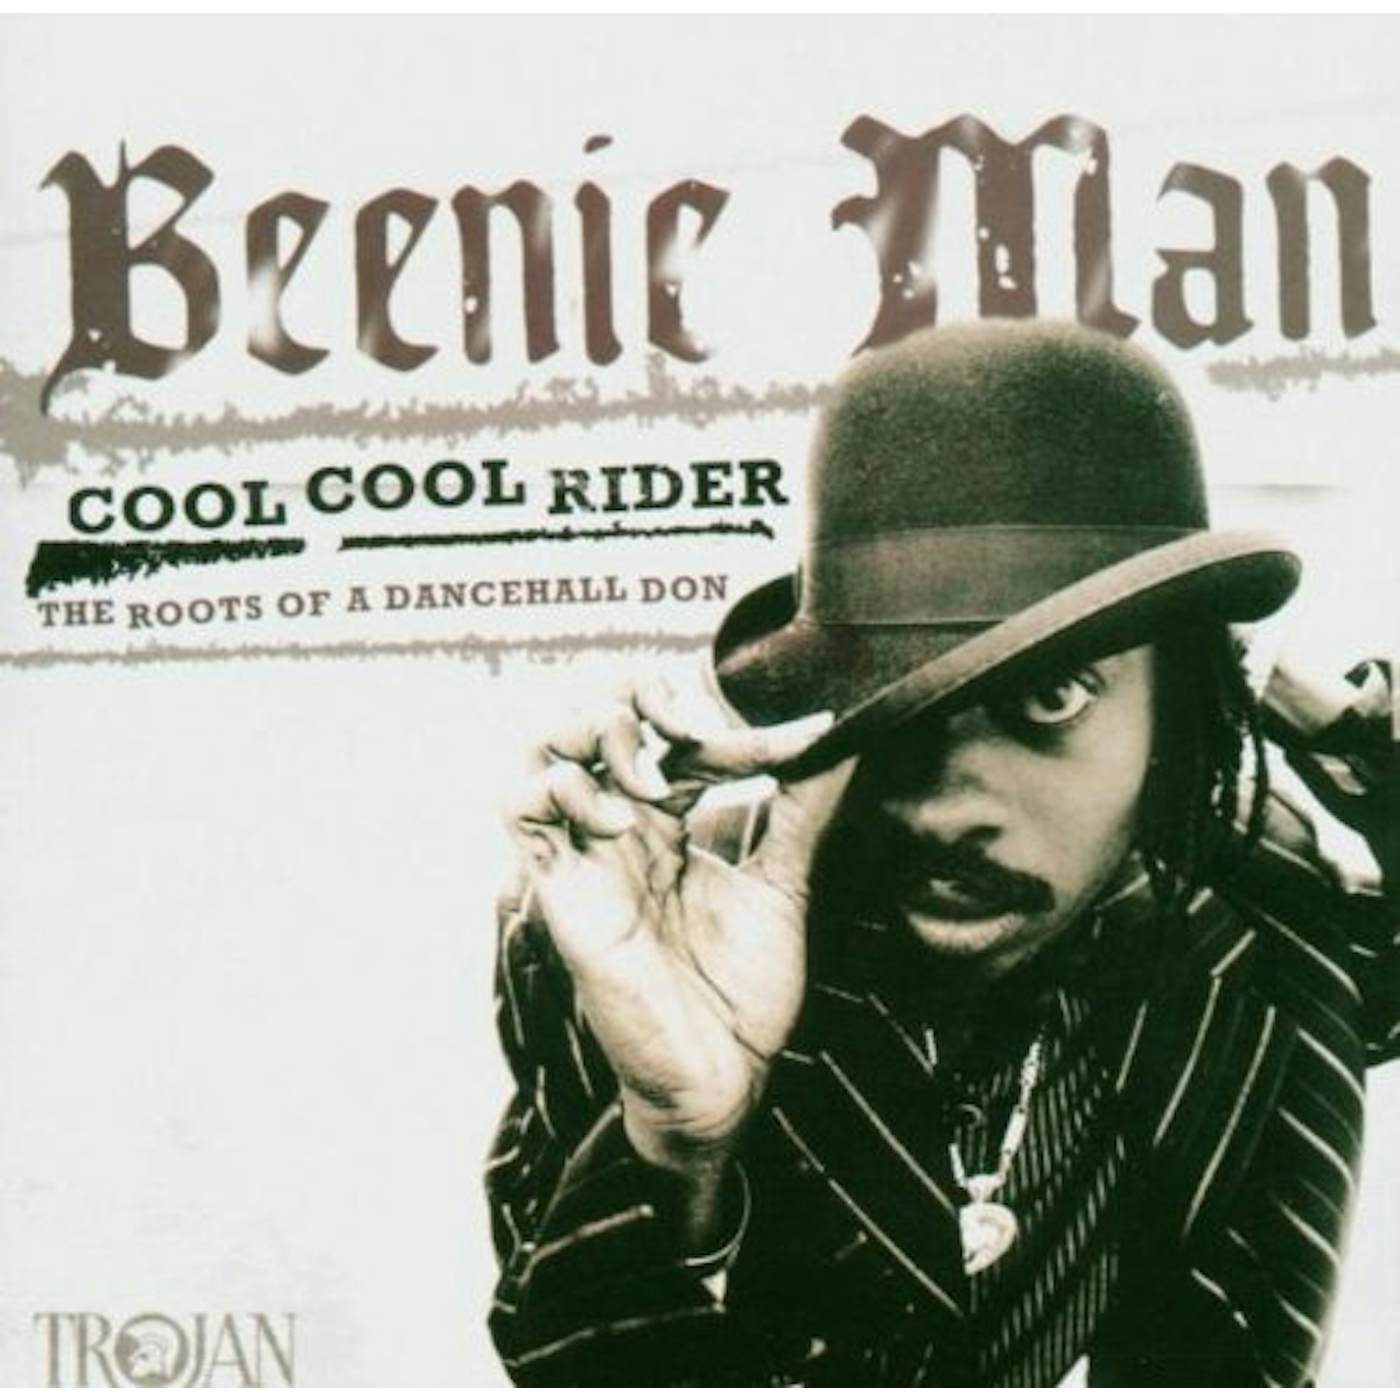 Beenie Man COOL COOL RIDER: THE ROOTS OF A DANCEHALL DON CD